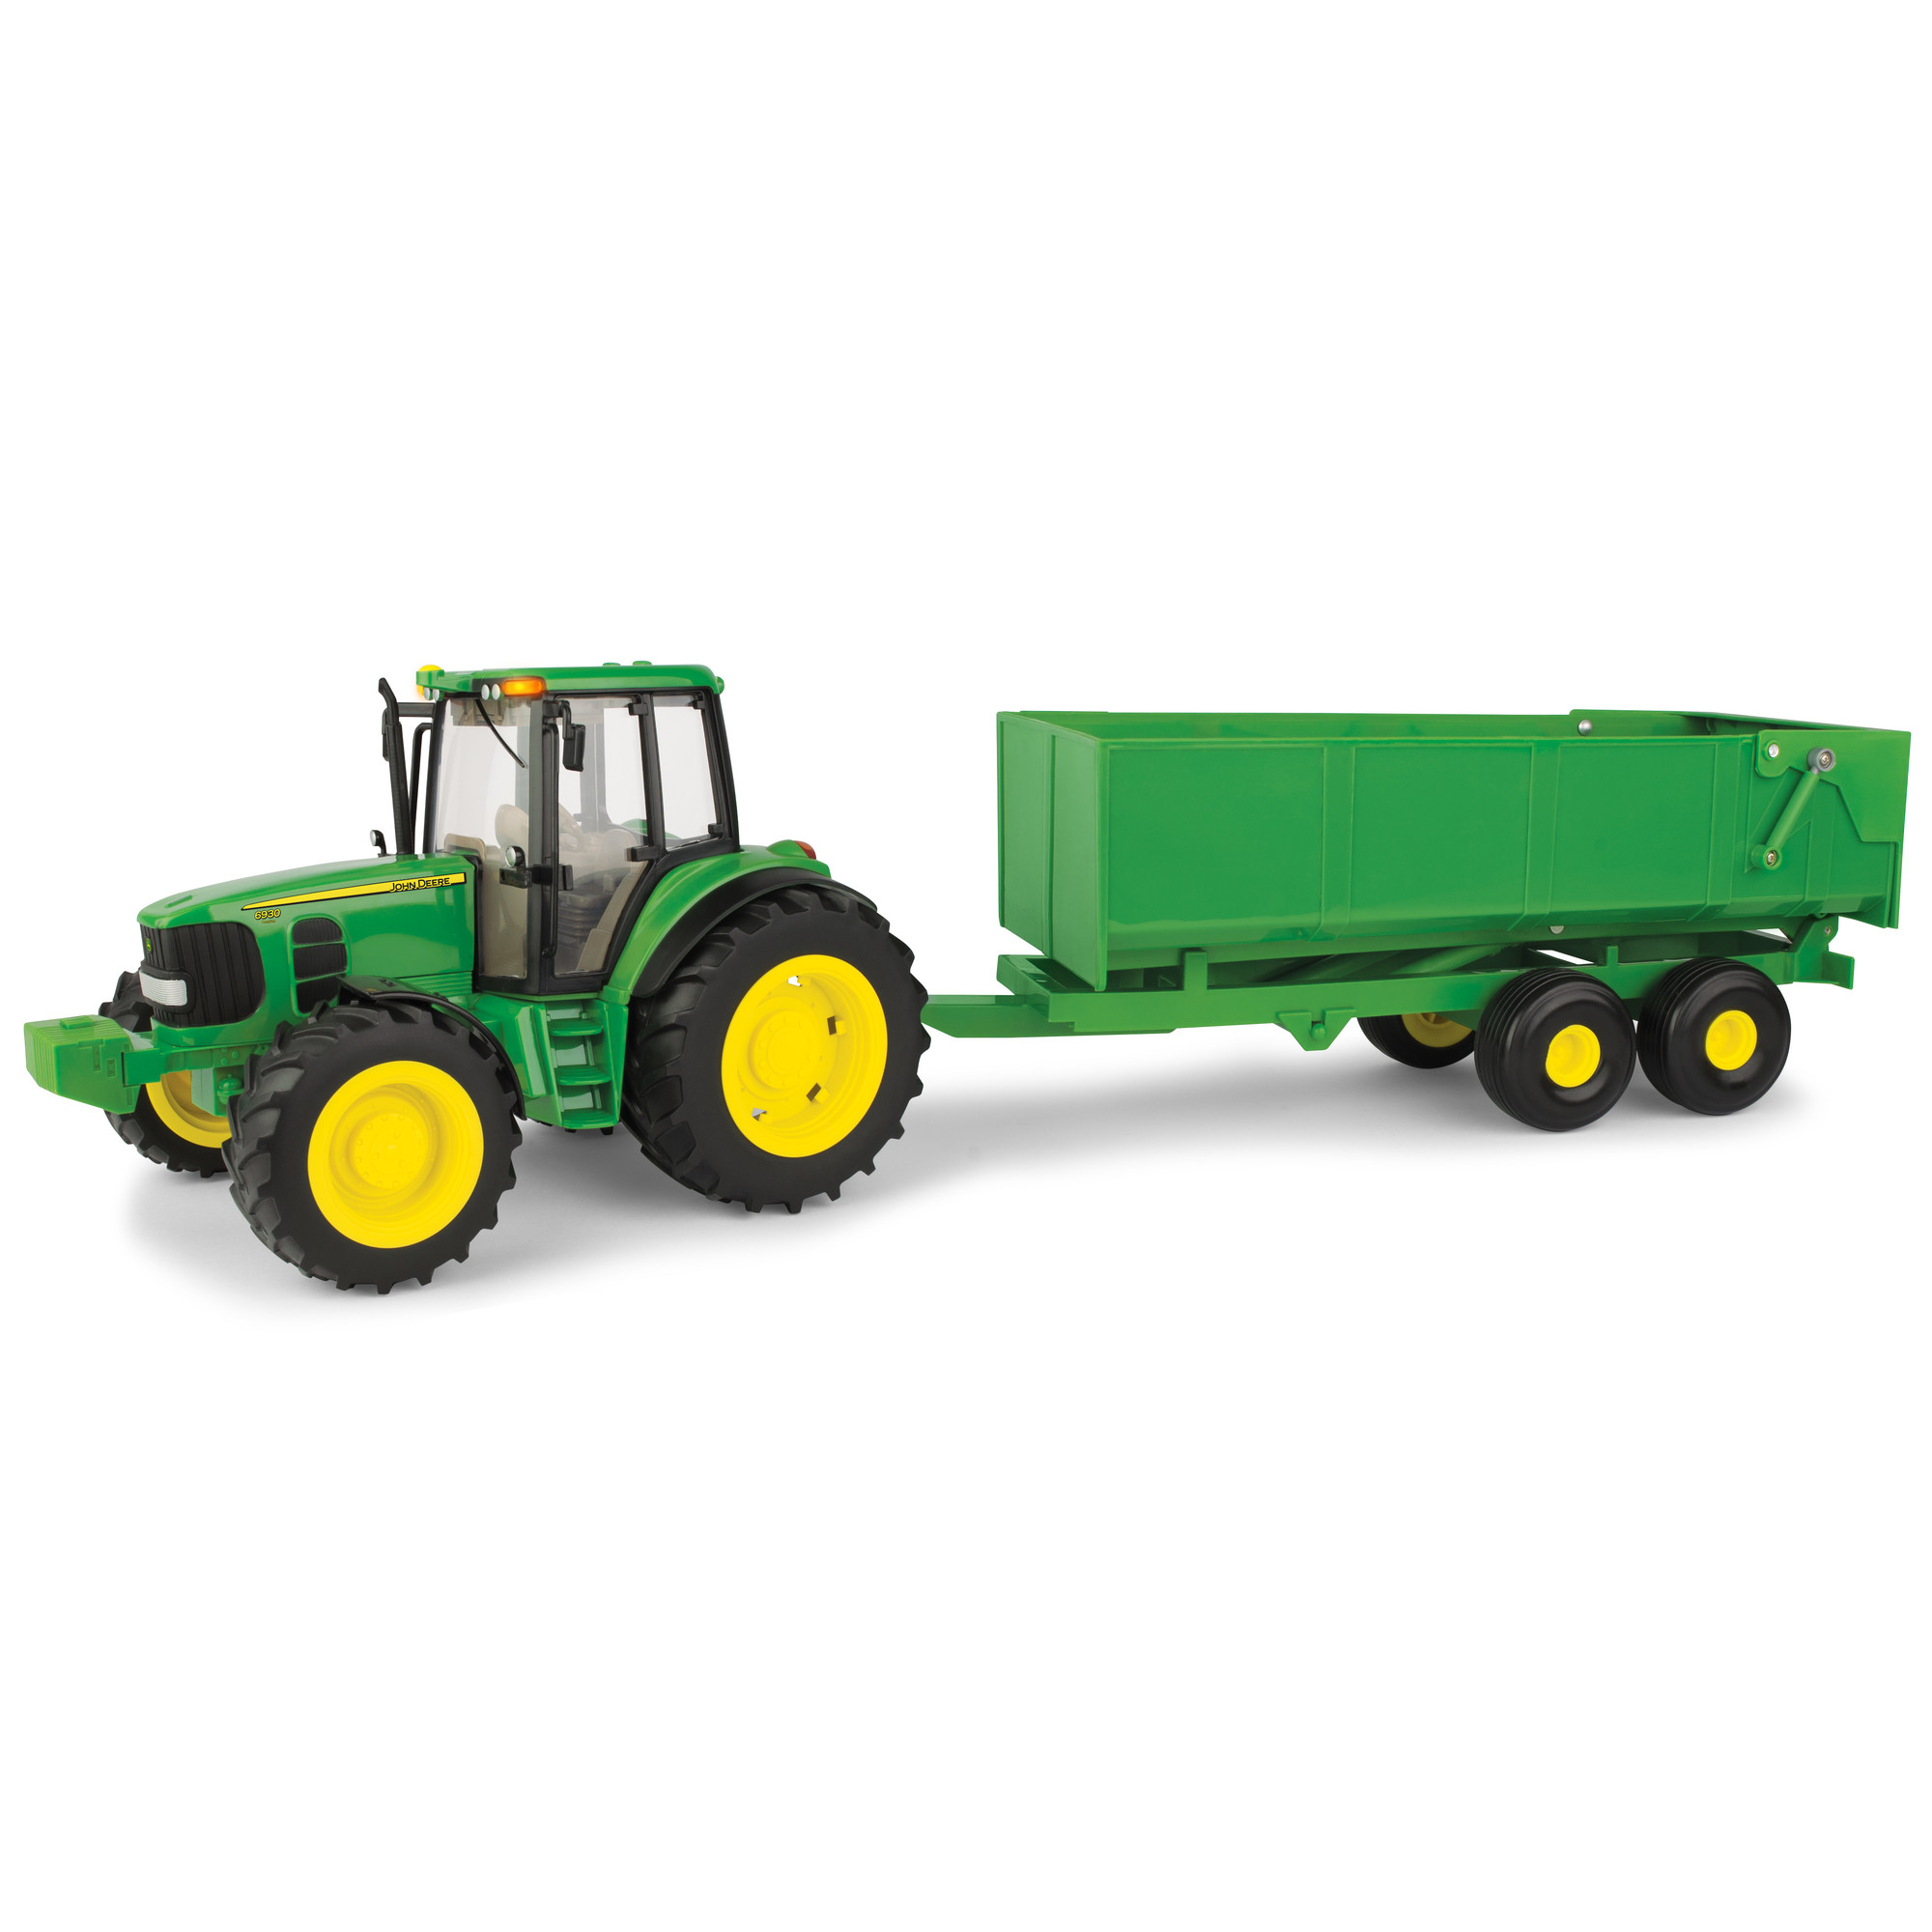 John Deere Big Farm Toy Tractor, 7430 Tractor with Wagon, 1:16 Scale - image 1 of 9